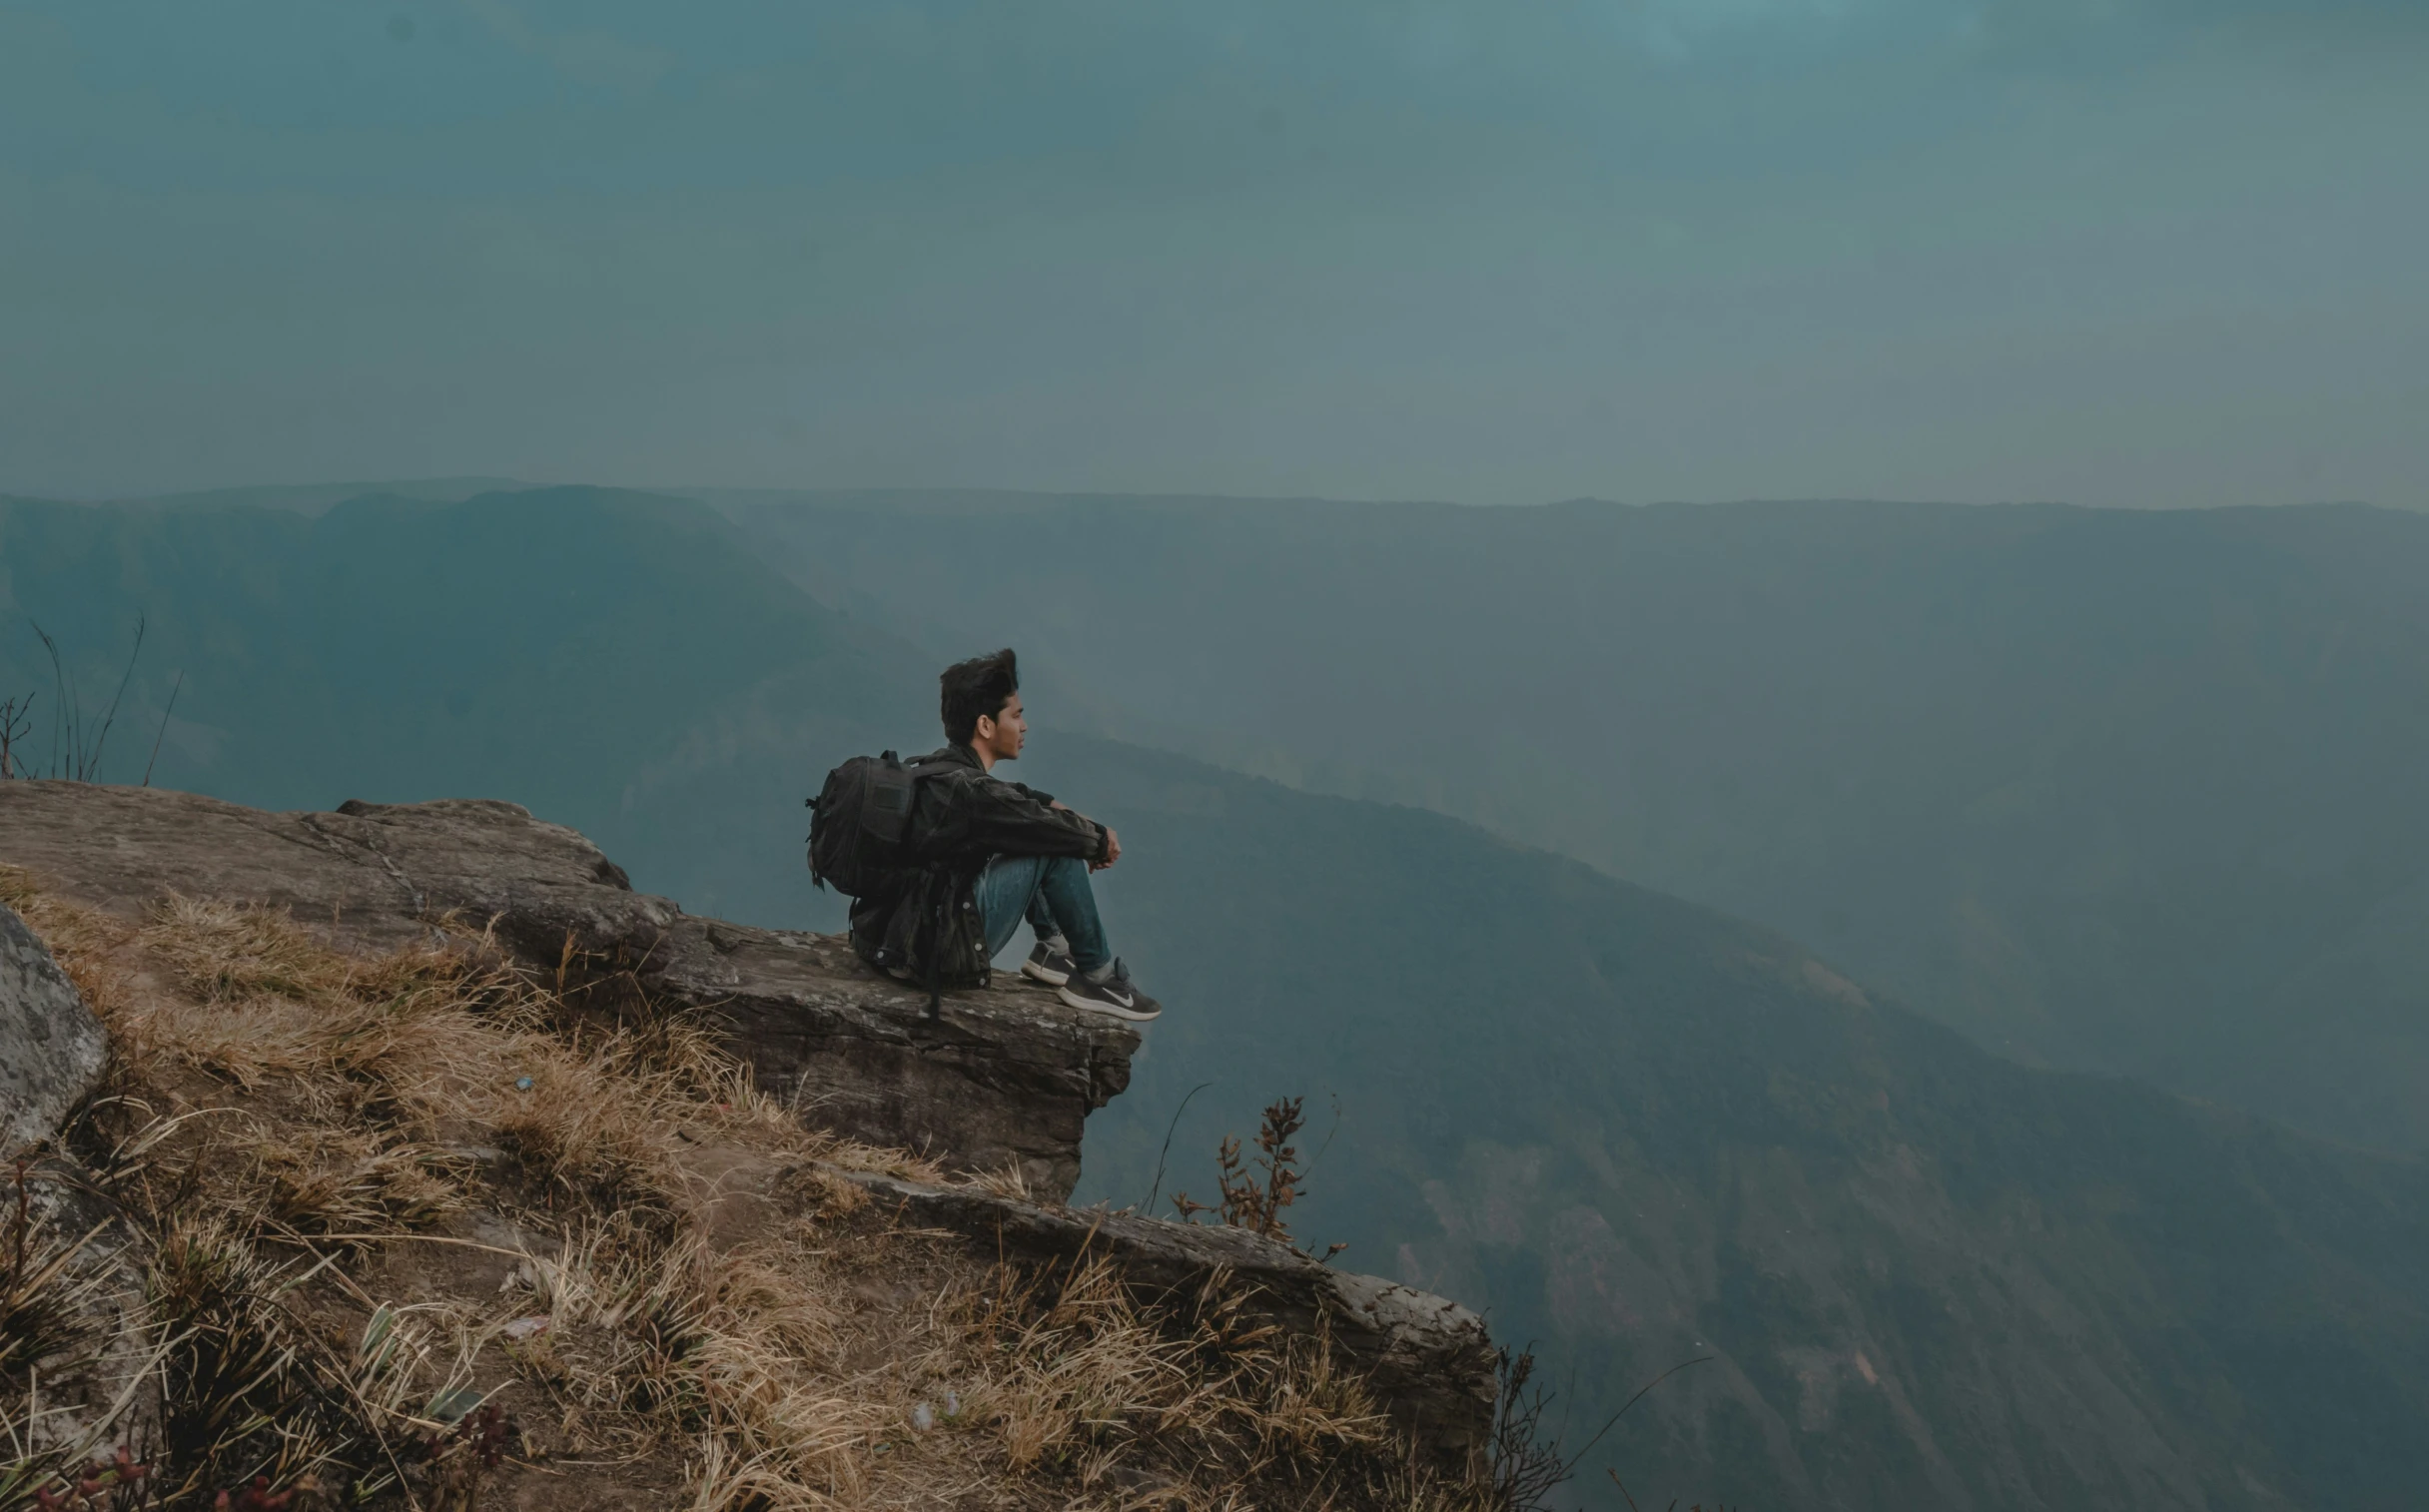 the person is sitting on a rocky hill overlooking the mountains